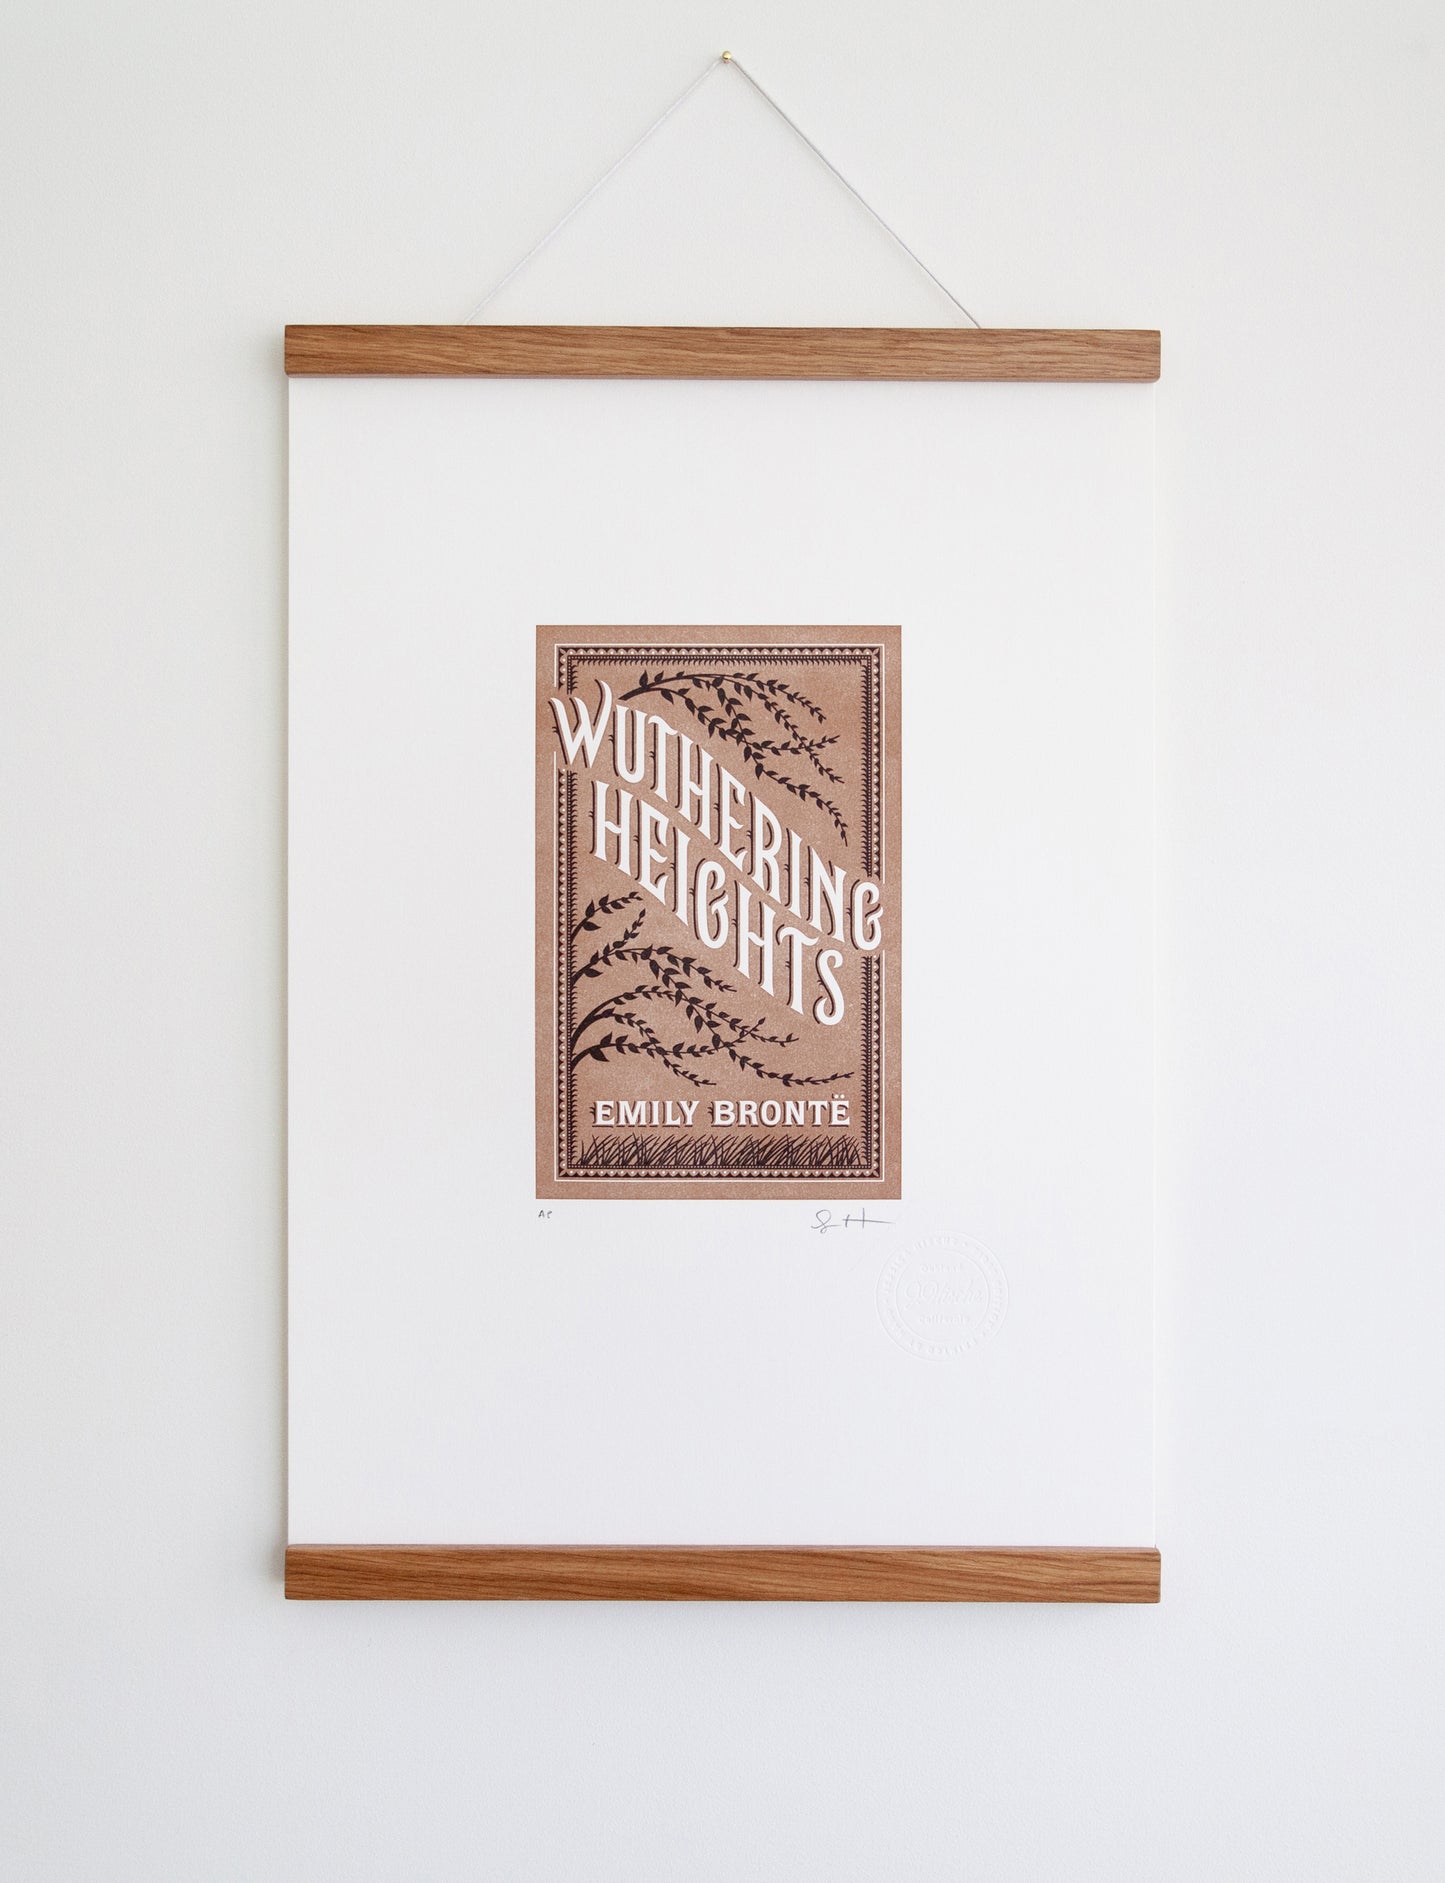 Wuthering Heights ART PRINT